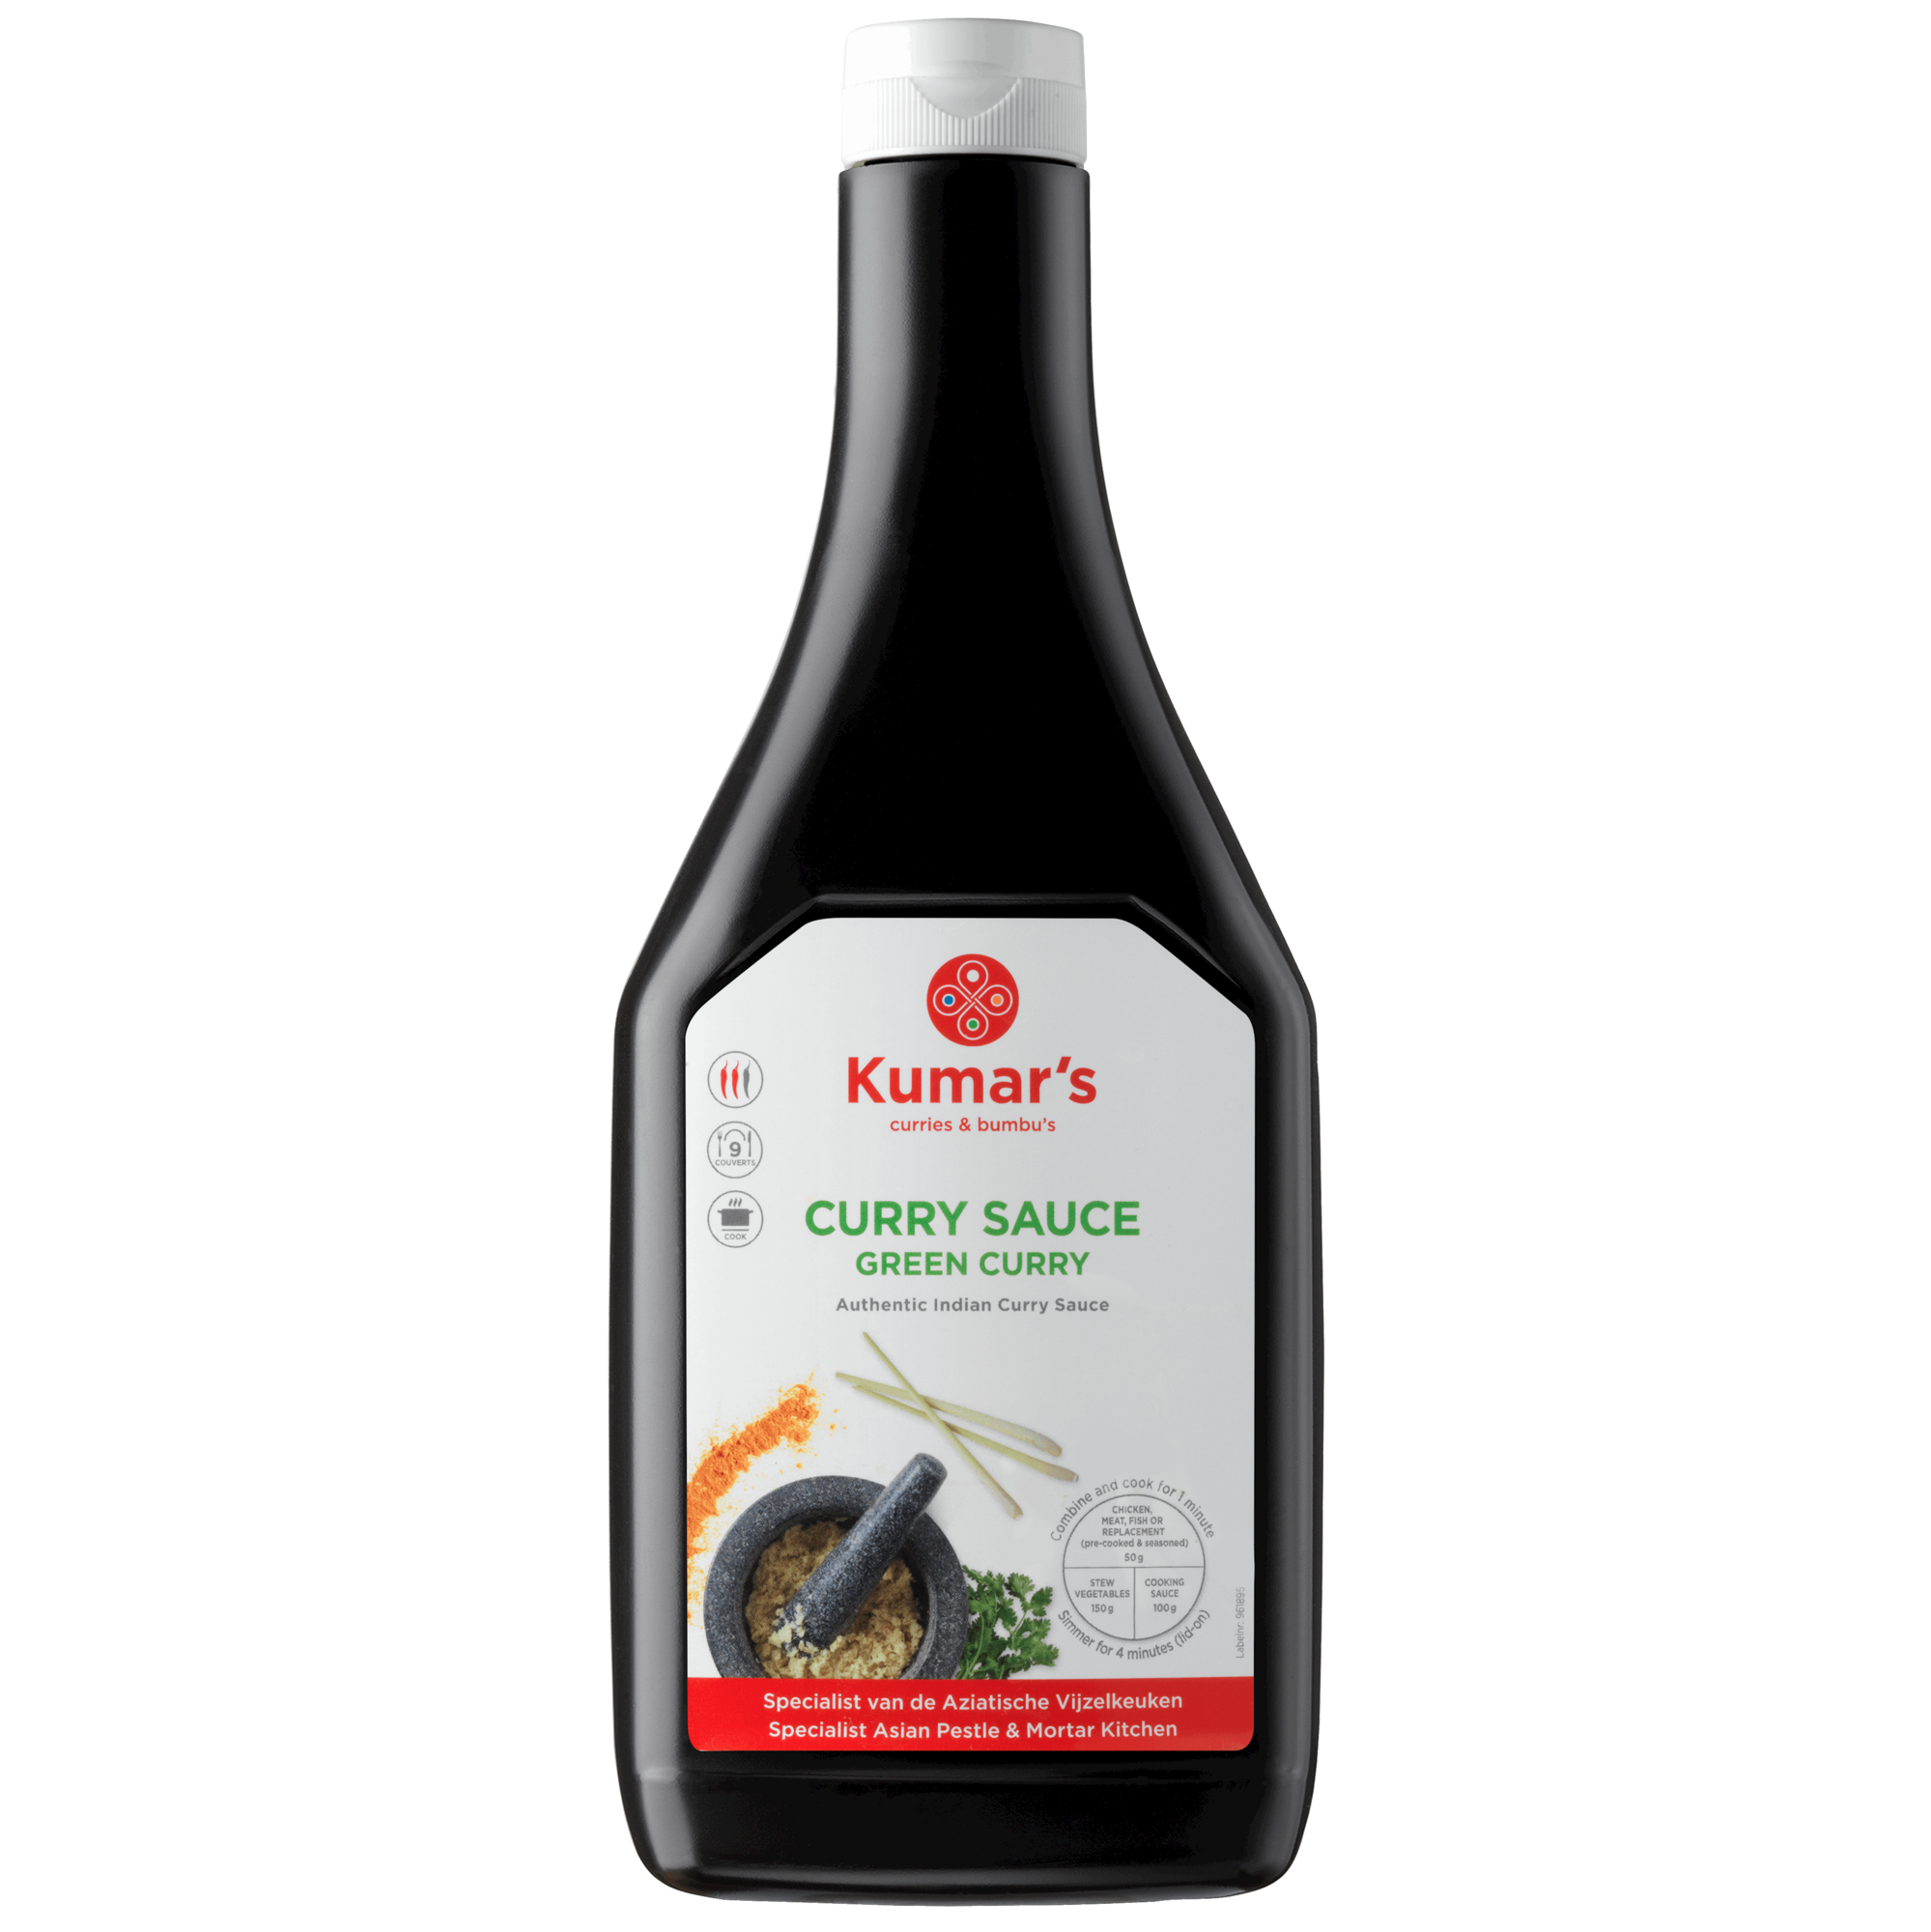 73106 Curry sauce green curry 875ml